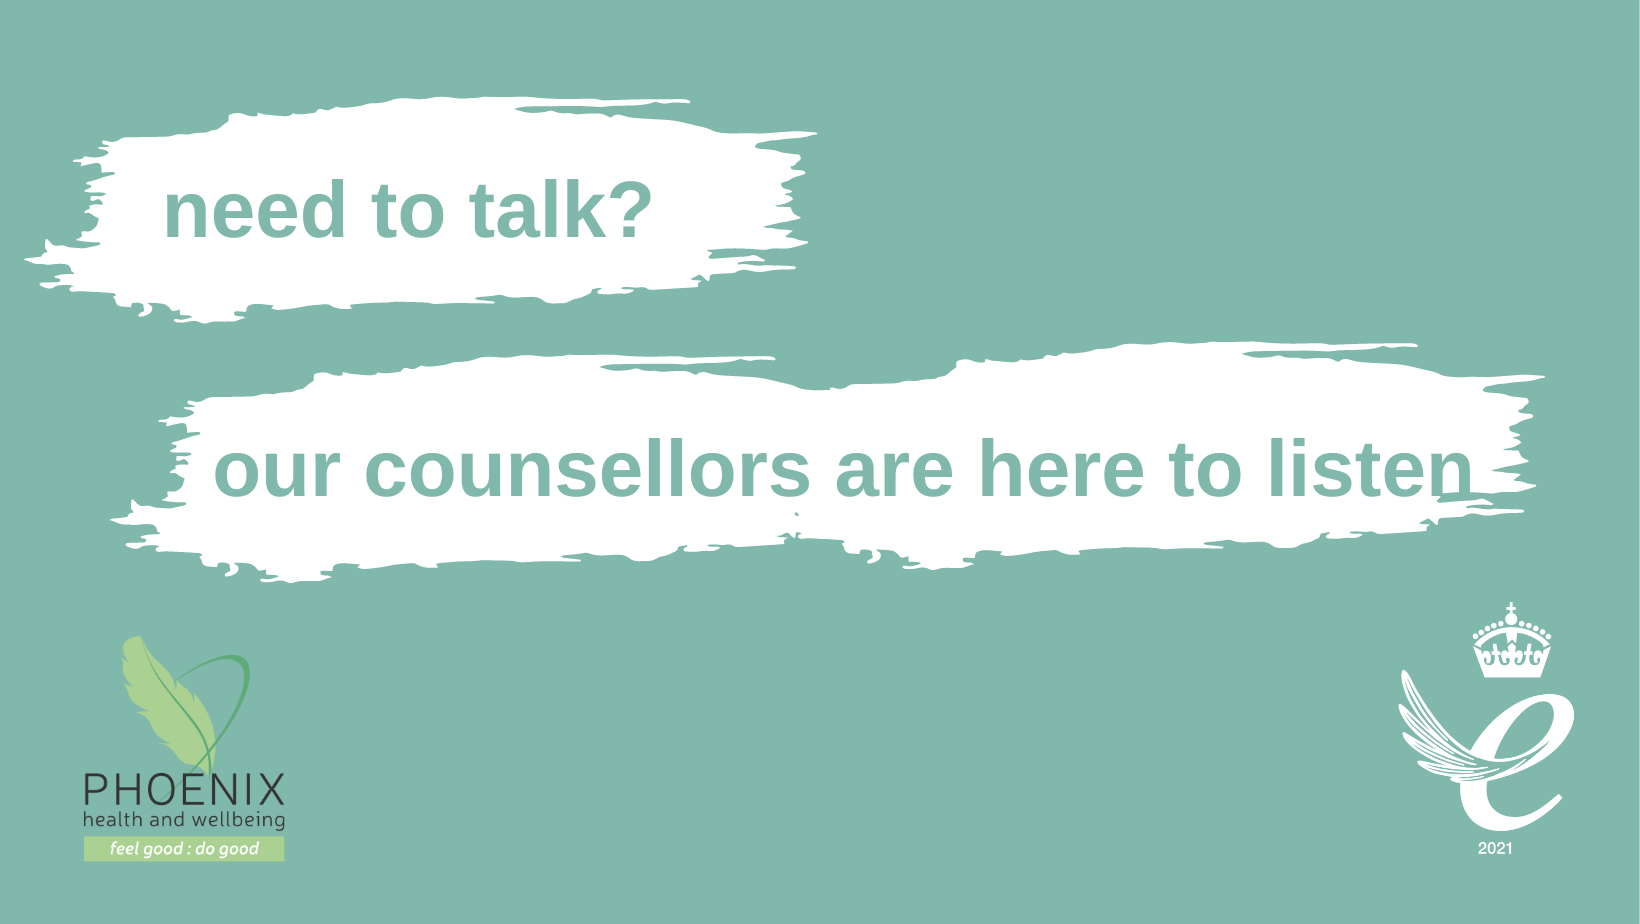 Five Little Known Facts About Our Counsellors